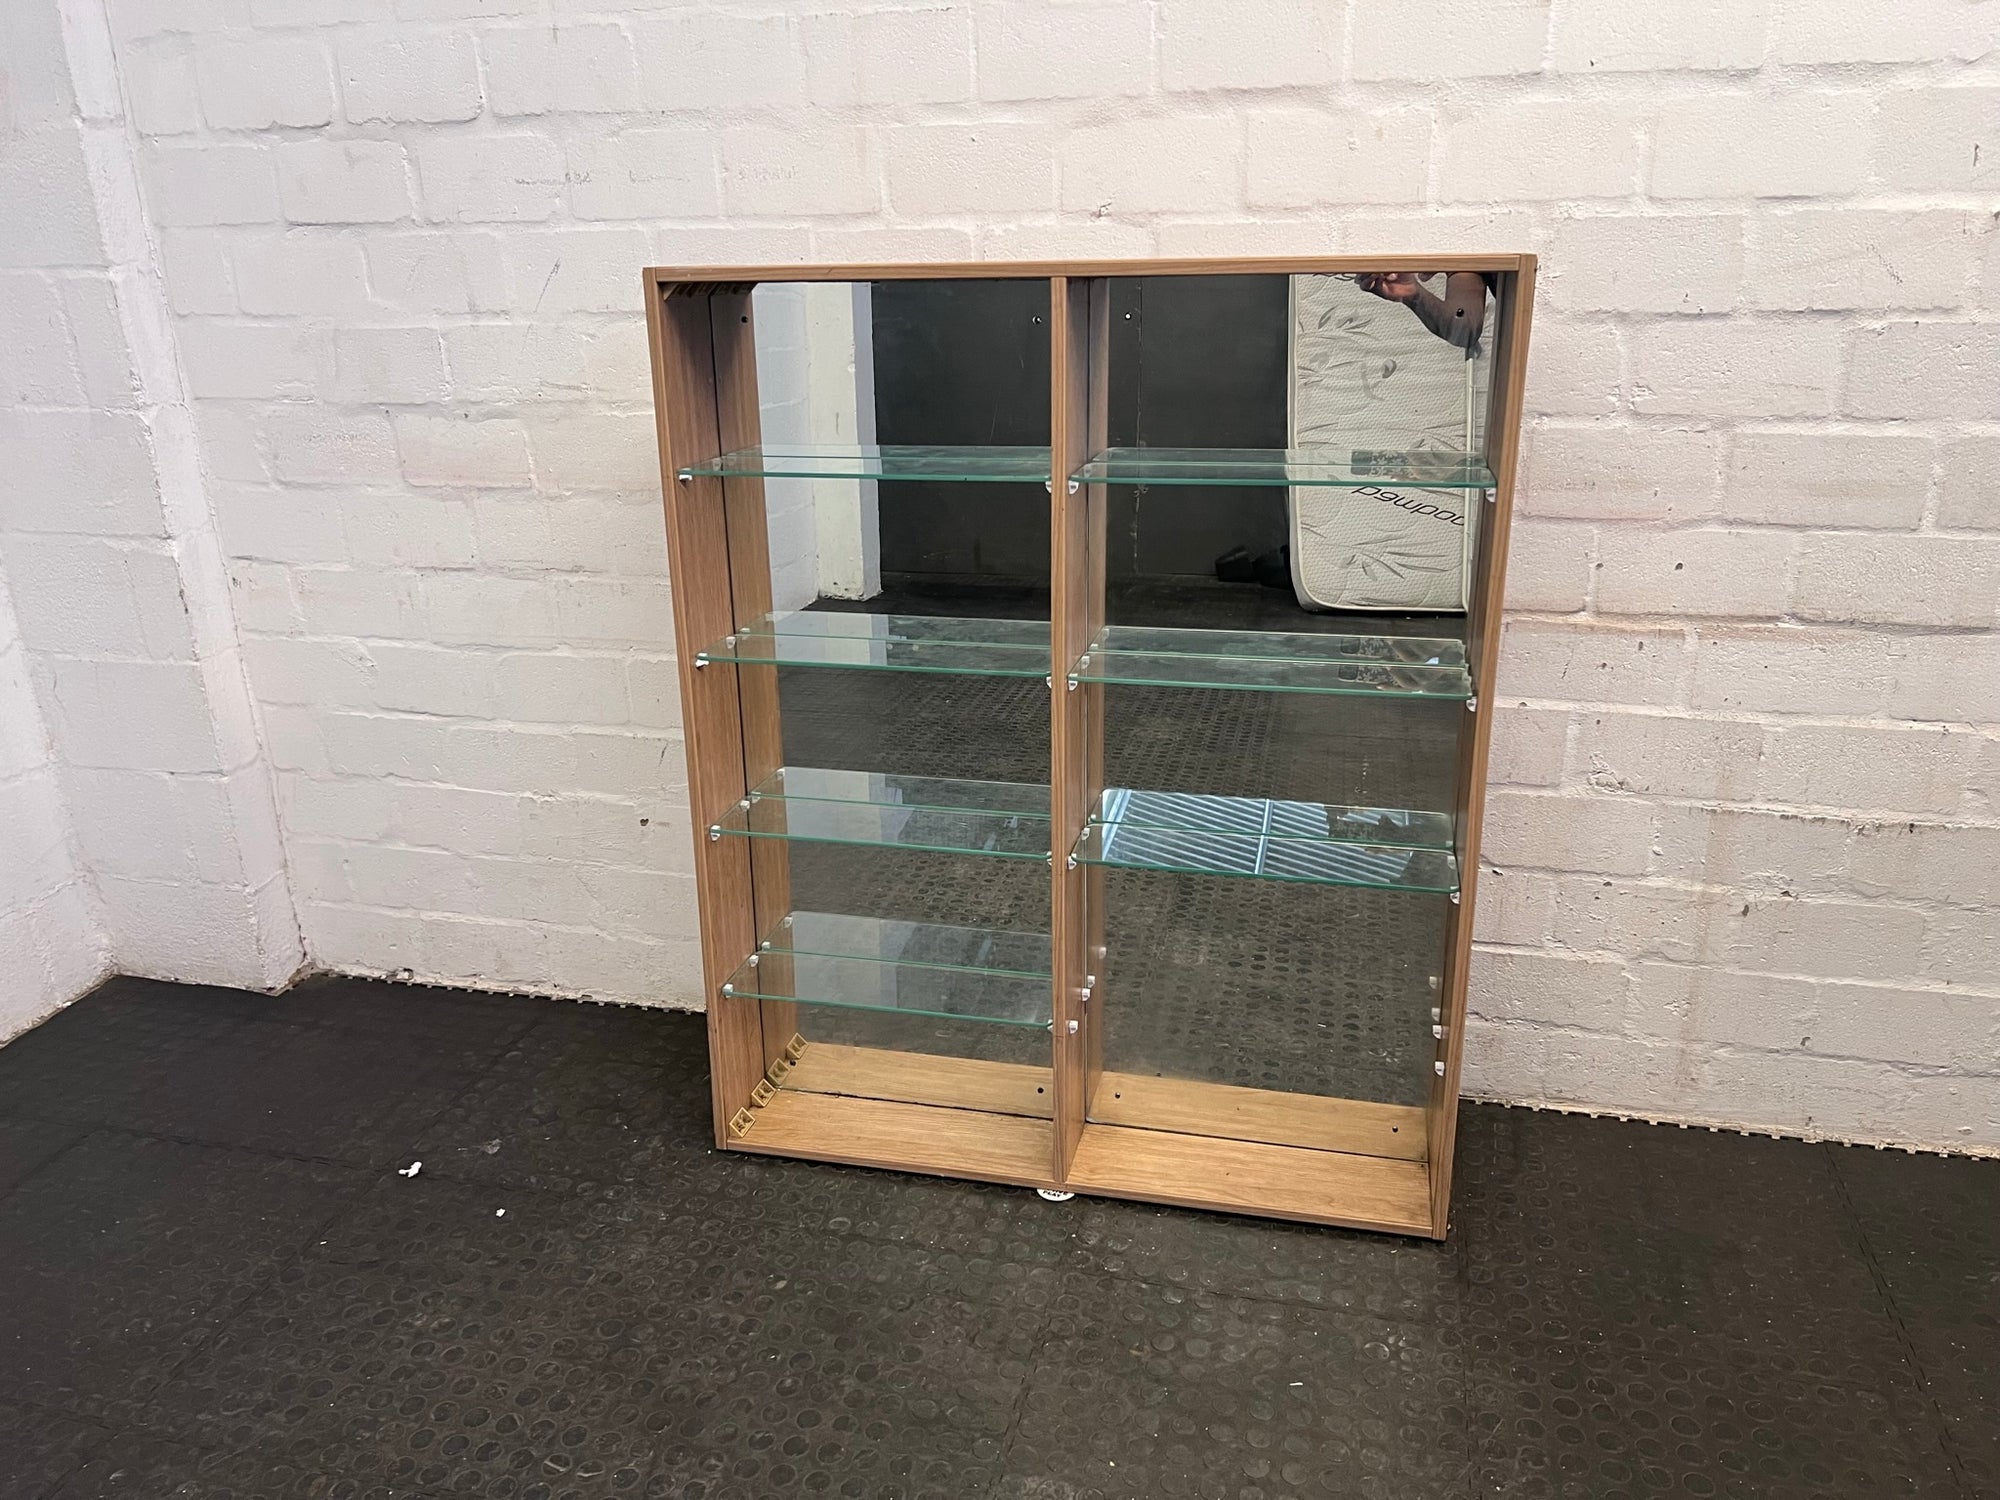 Wooden Frame 5 Tier Glass Shelf With Mirror Backing (1 Glass Shelf Missing)